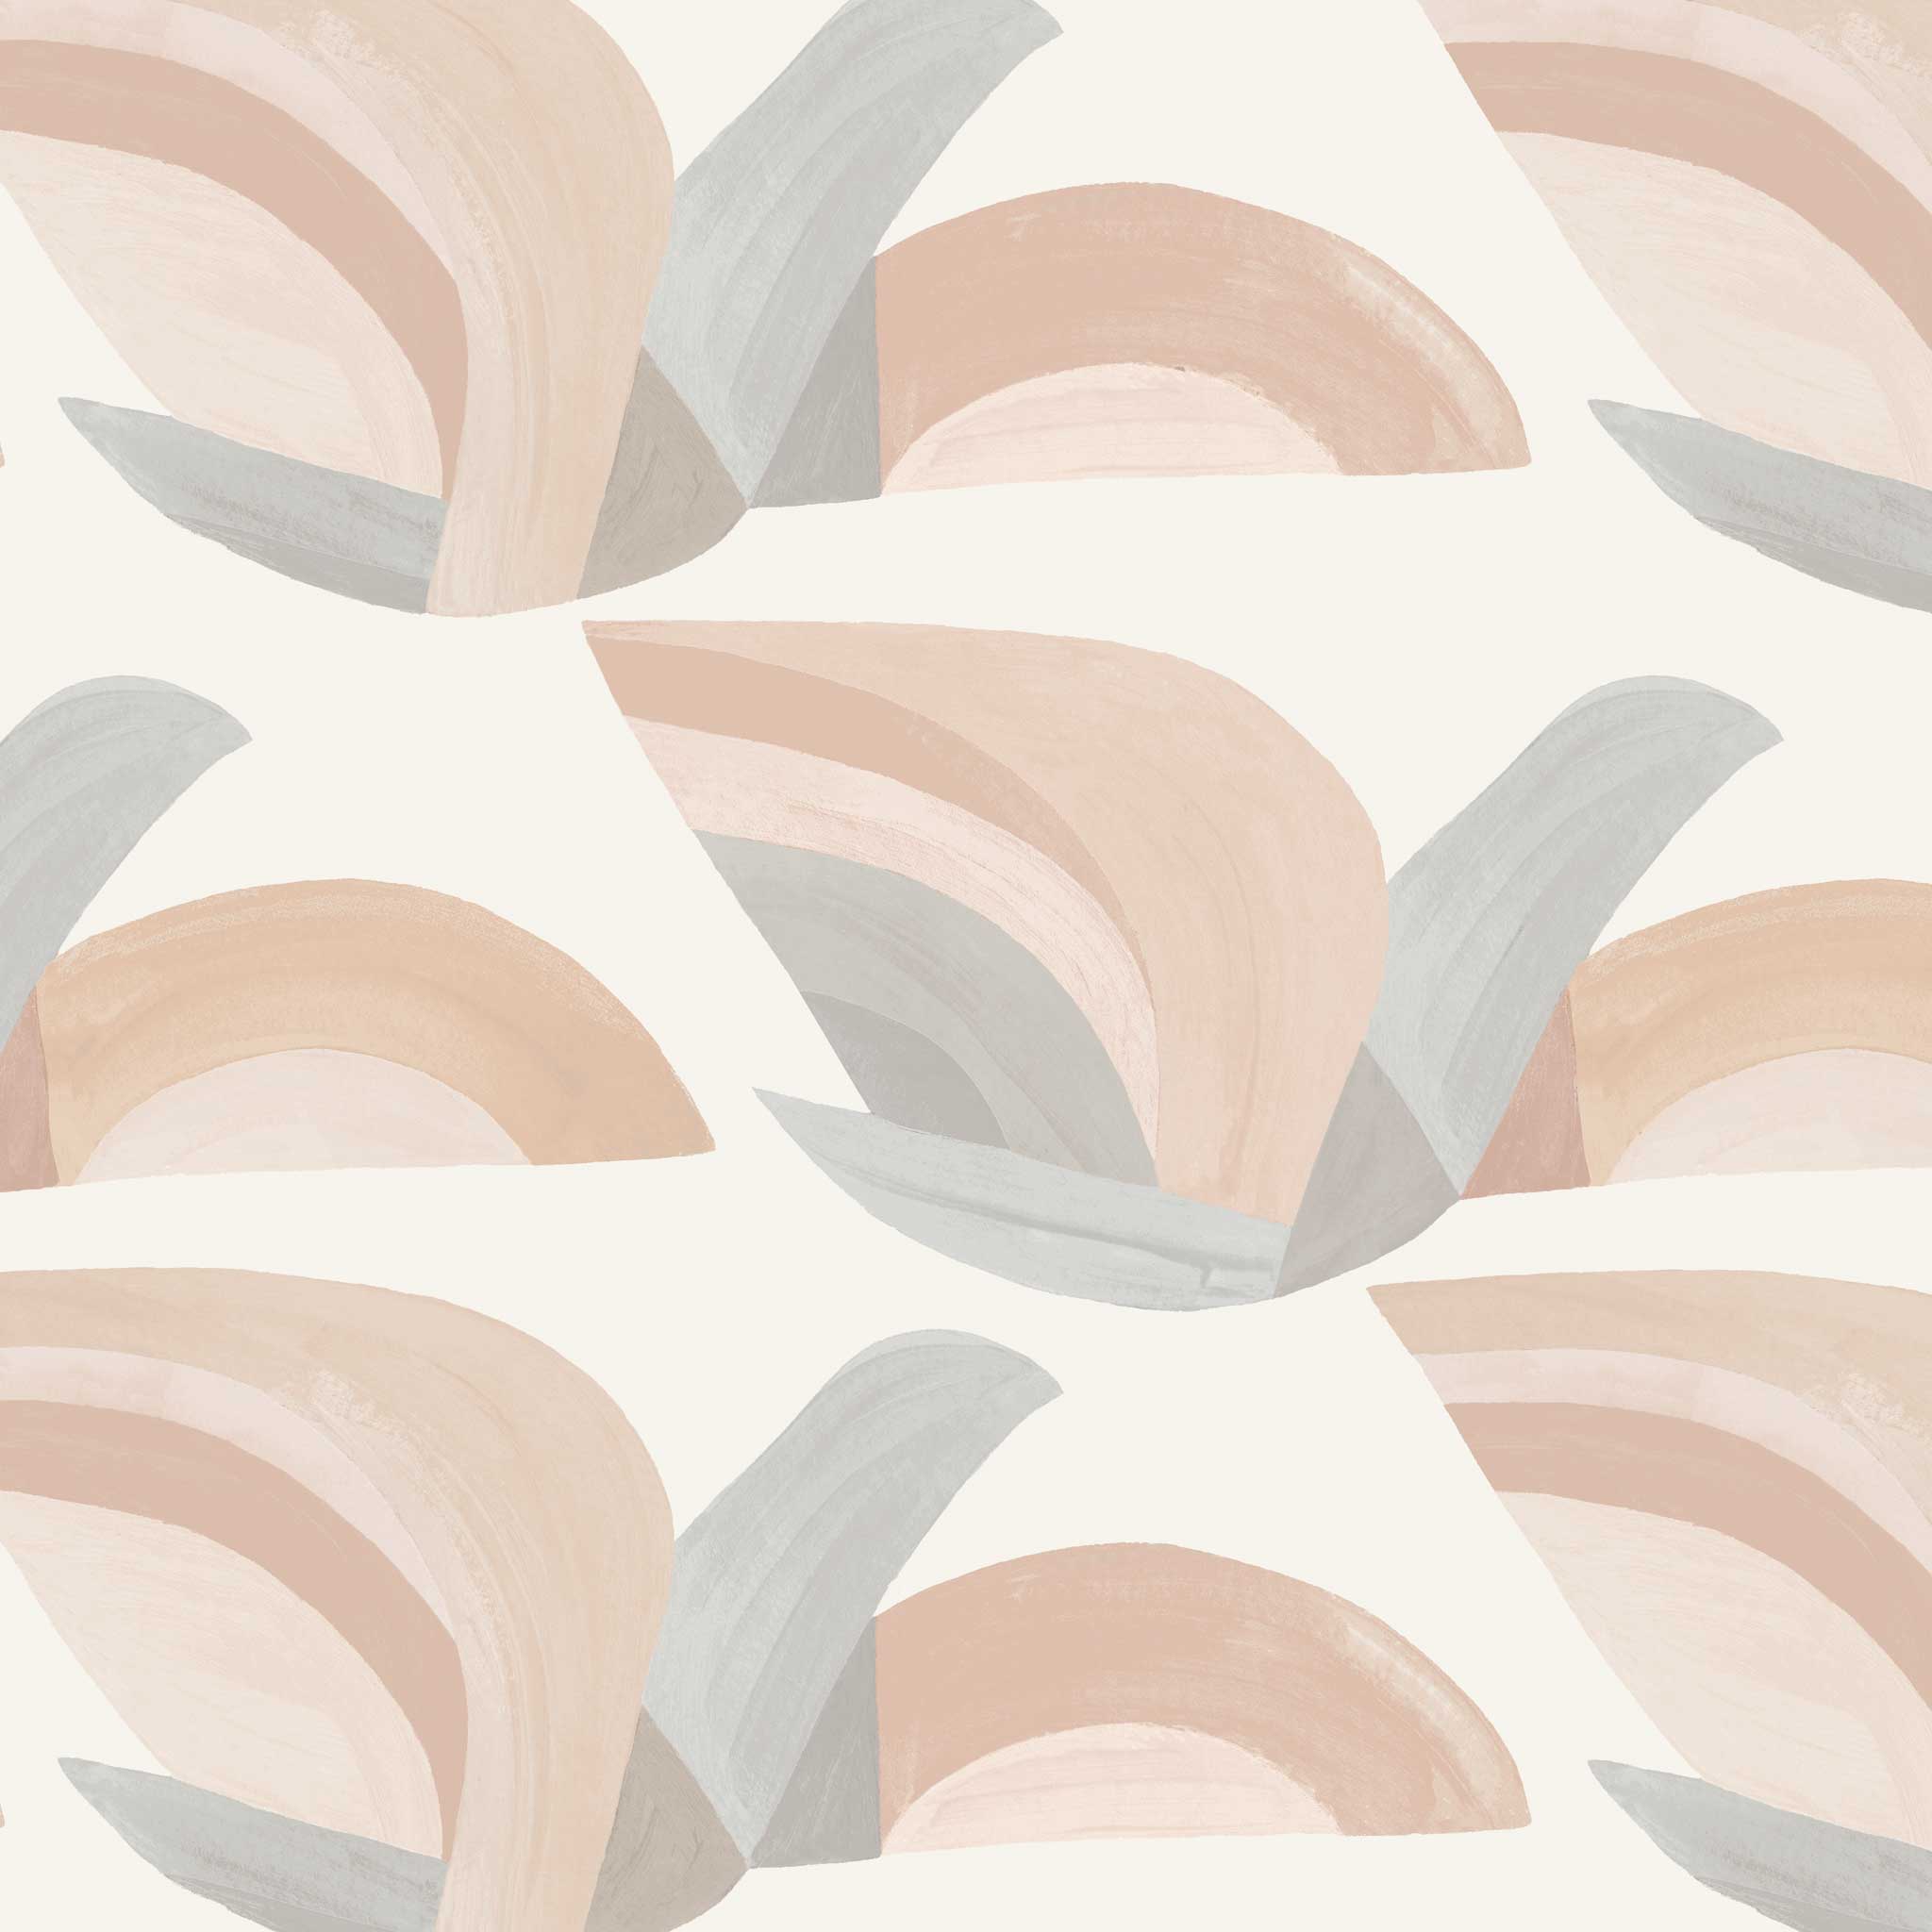 Rainbow wallpaper in pink and grey on a cream background - Terracotta